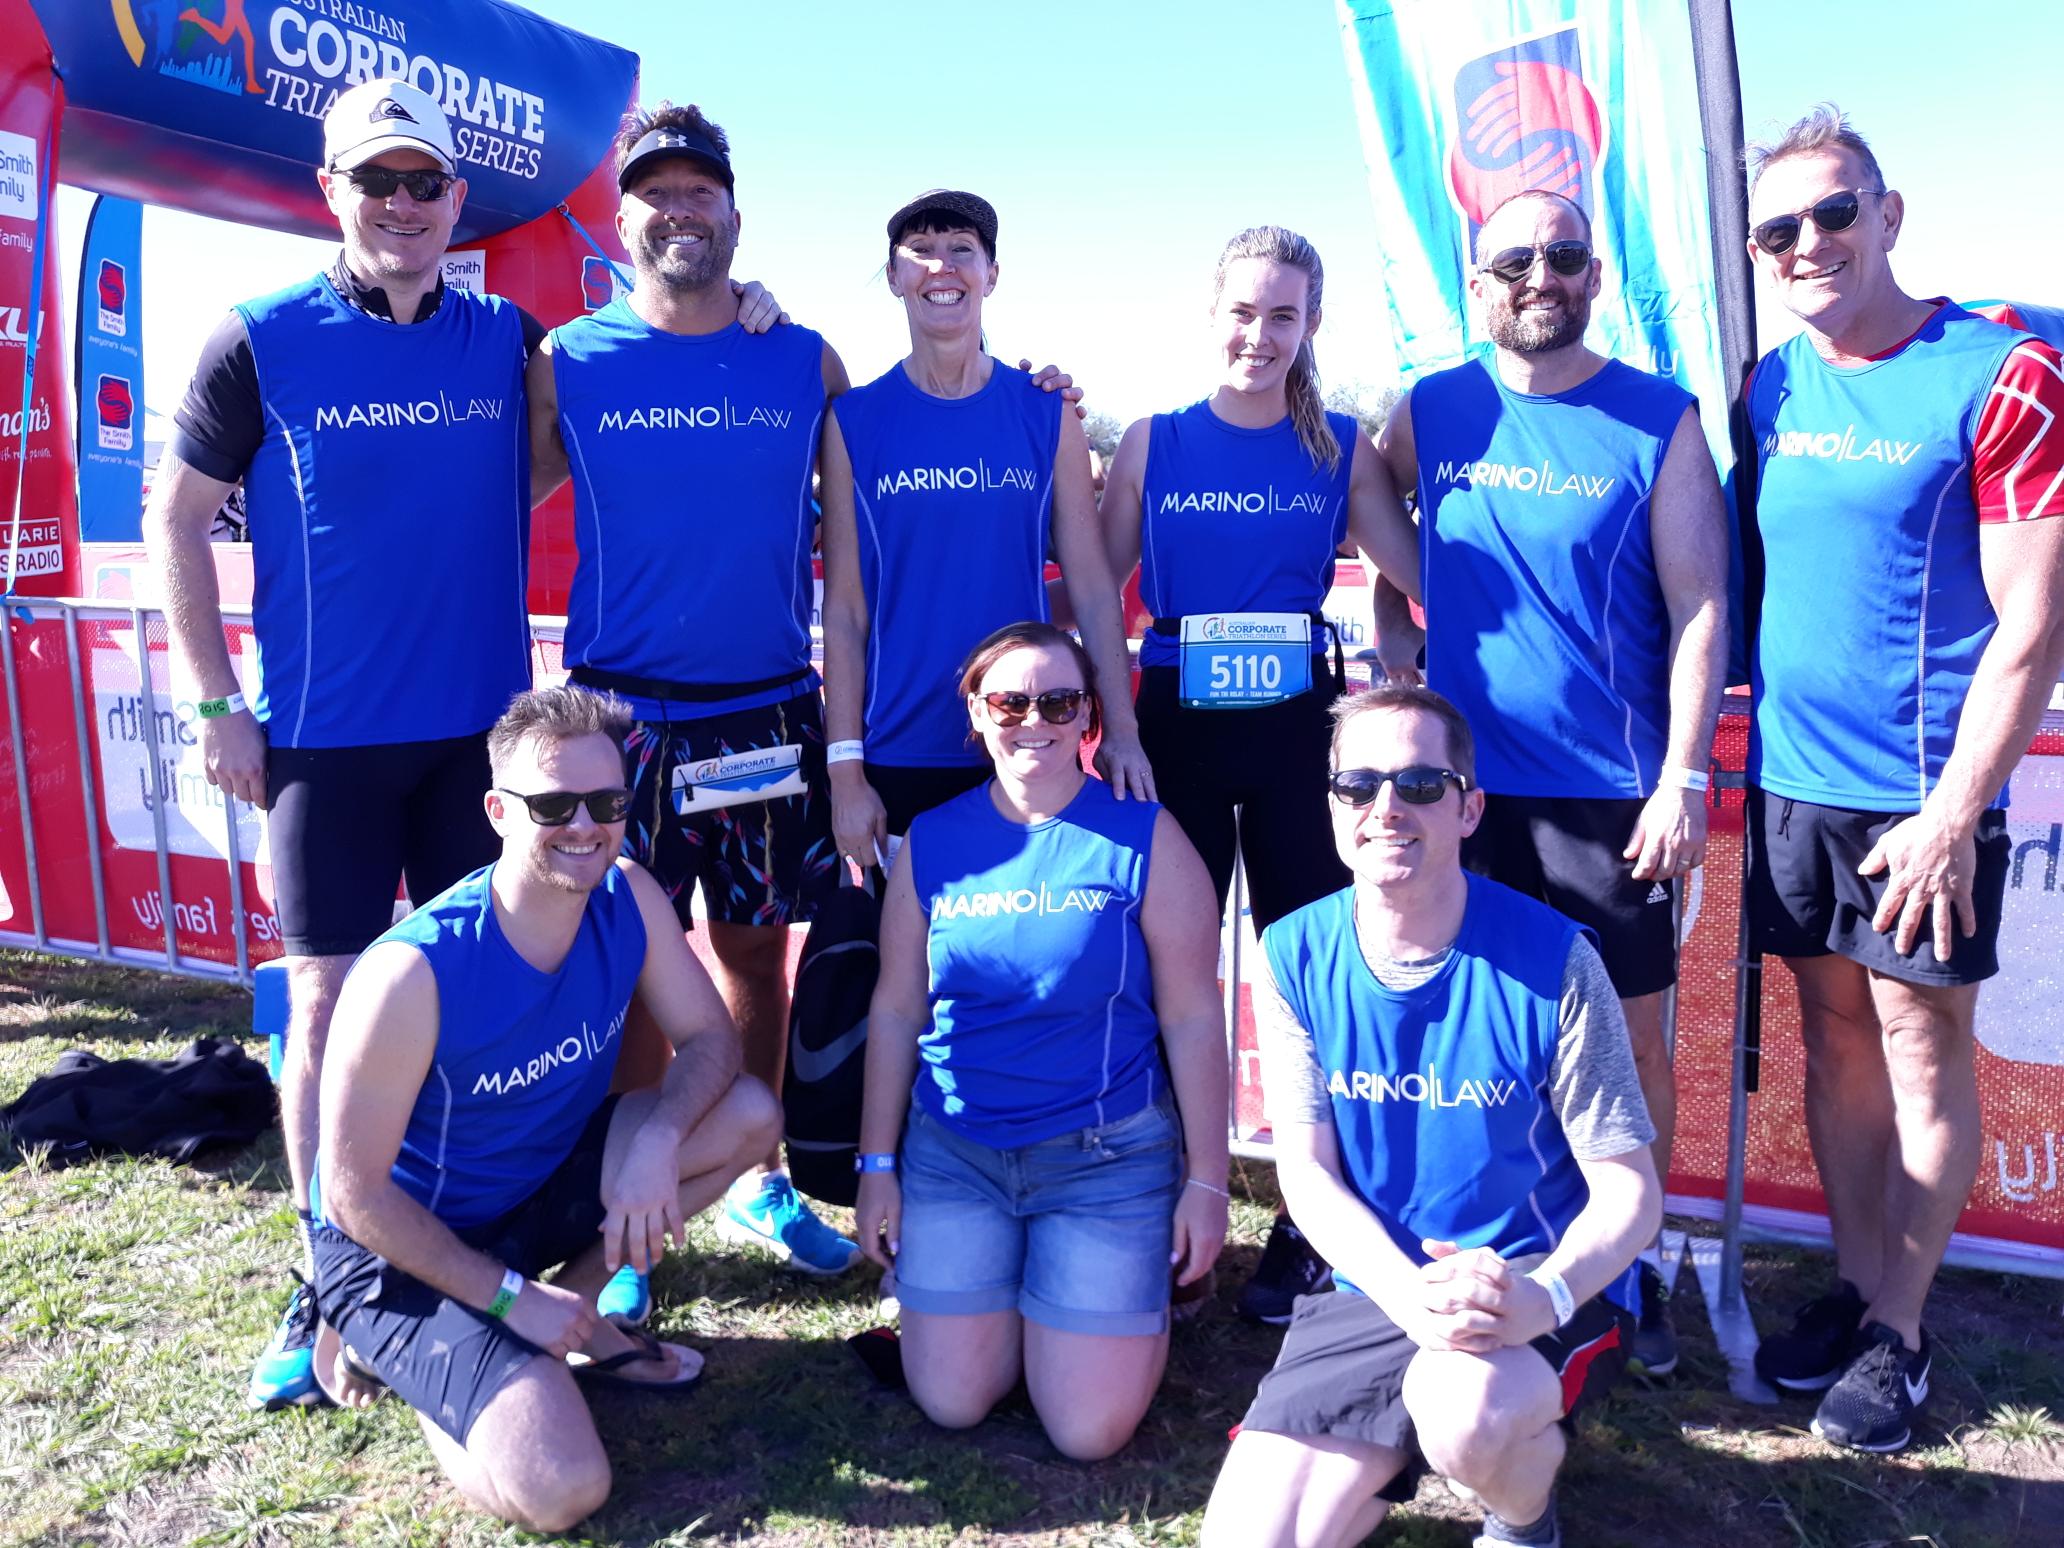 Marino Law gets active at the Gold Coast Corporate Triathlon